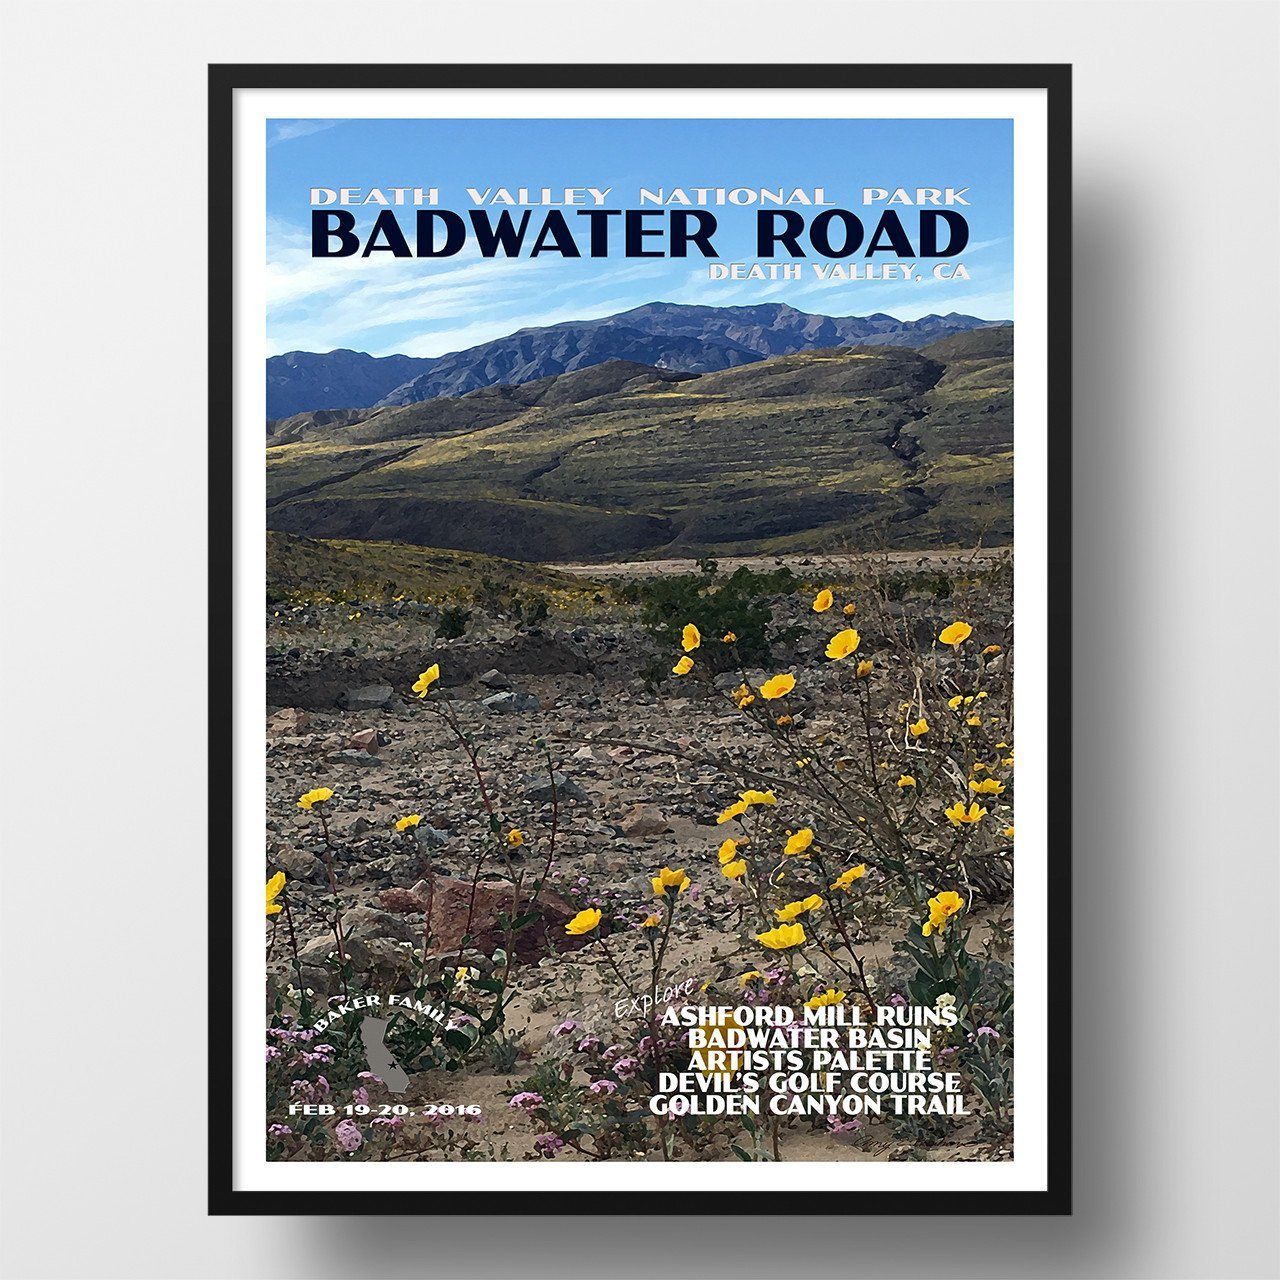 Death Valley National Park Poster-Badwater Road Wildflowers in Hills (Personalized)